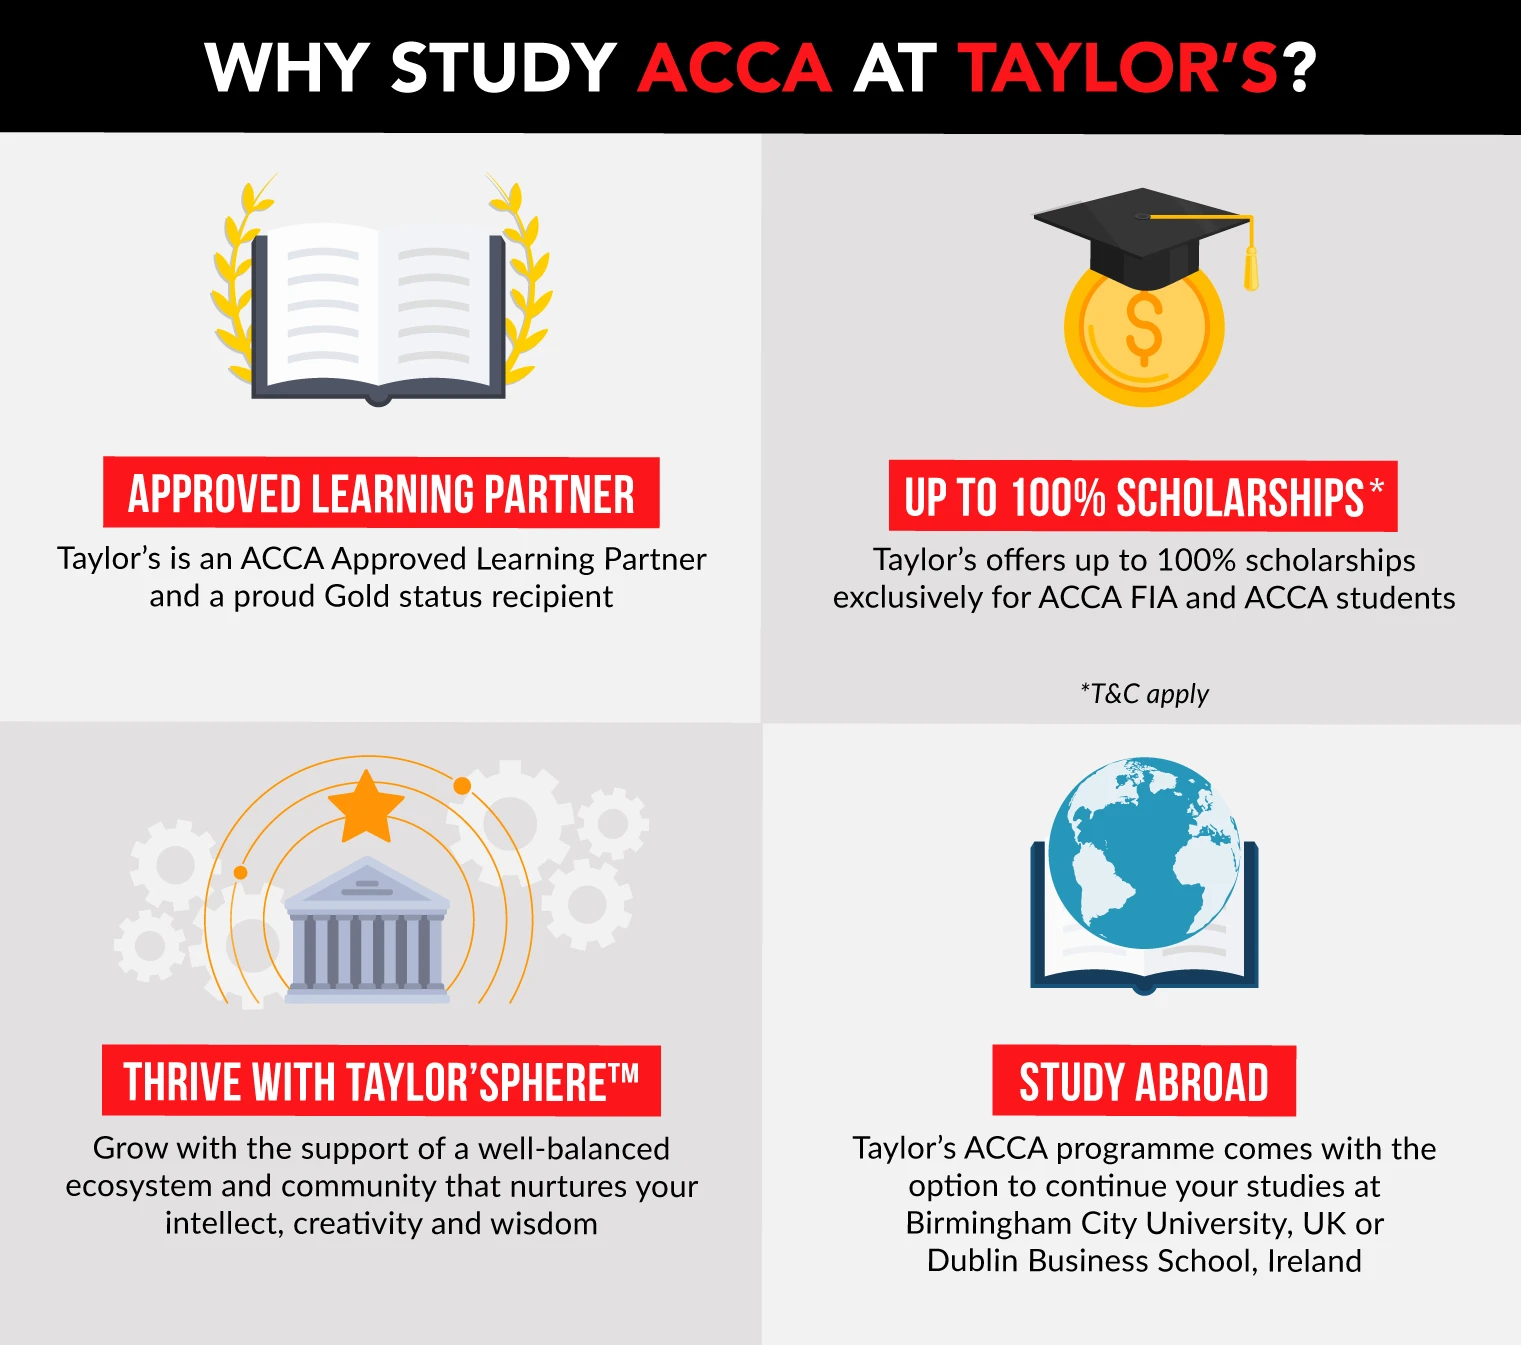 taylors-chat-gpt-replace-accountants-why-acca-taylors